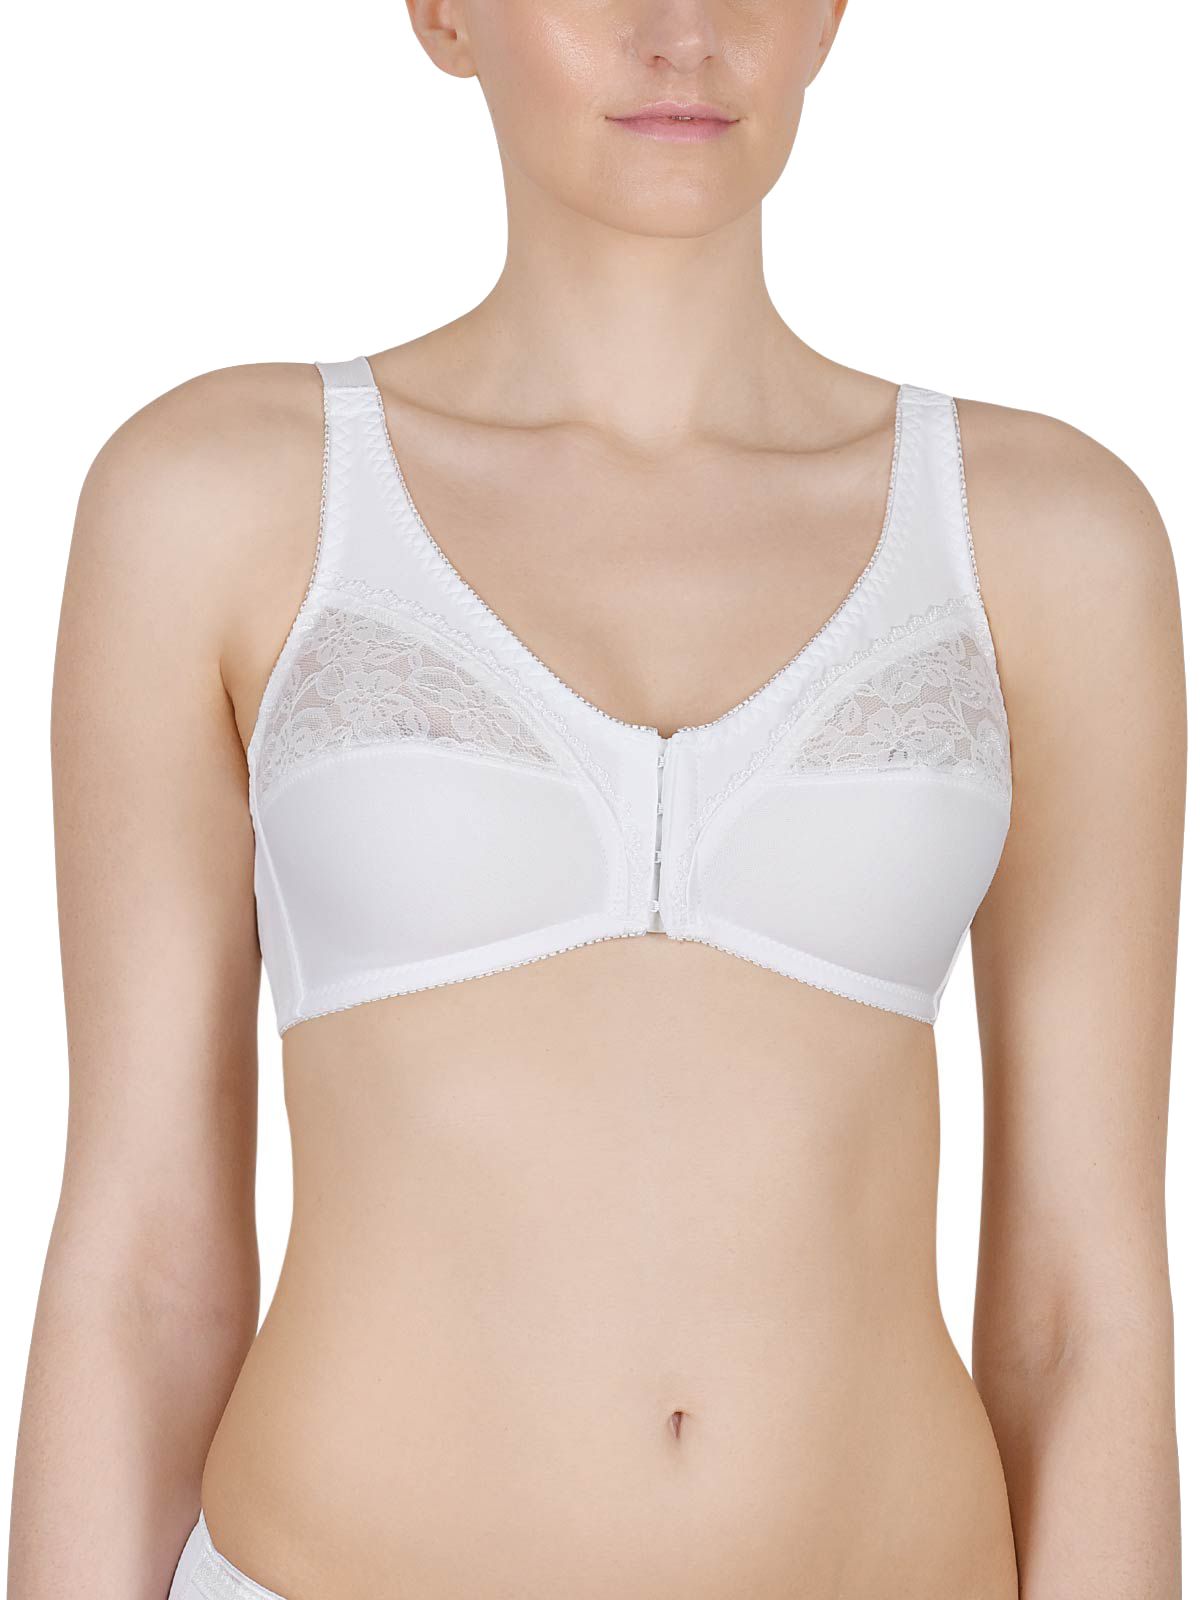 Naturana Front Fastening Bra. With no padding and wire free cups. The product is recommended for hand wash only.